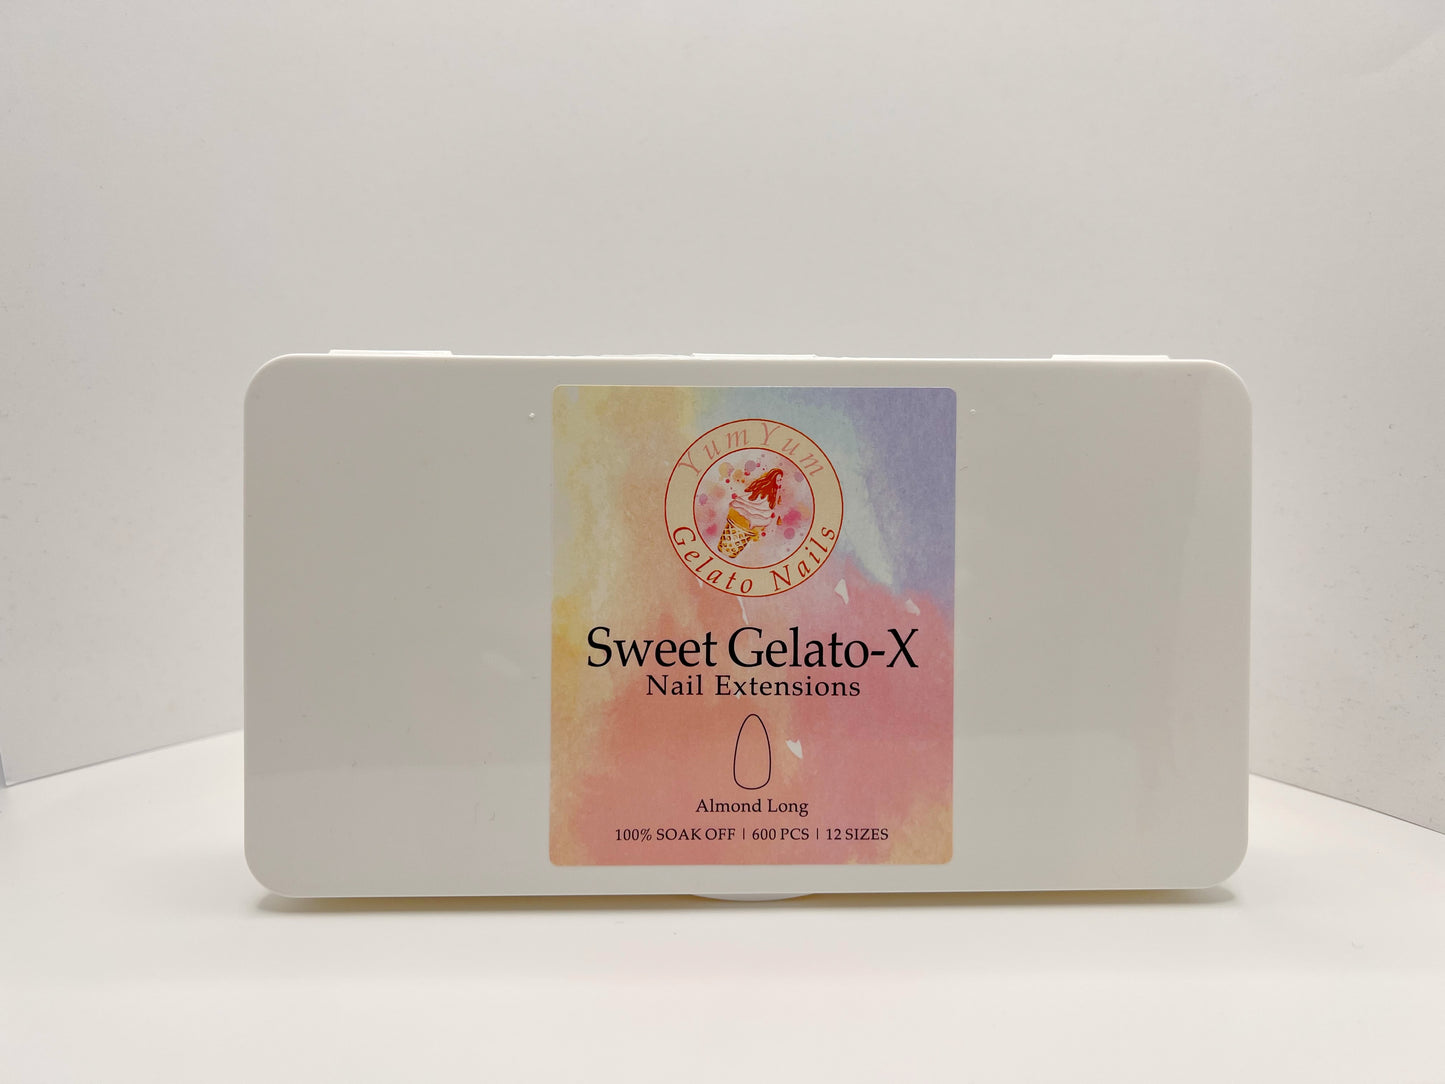 Sweet Gelato-X Nail Extensions